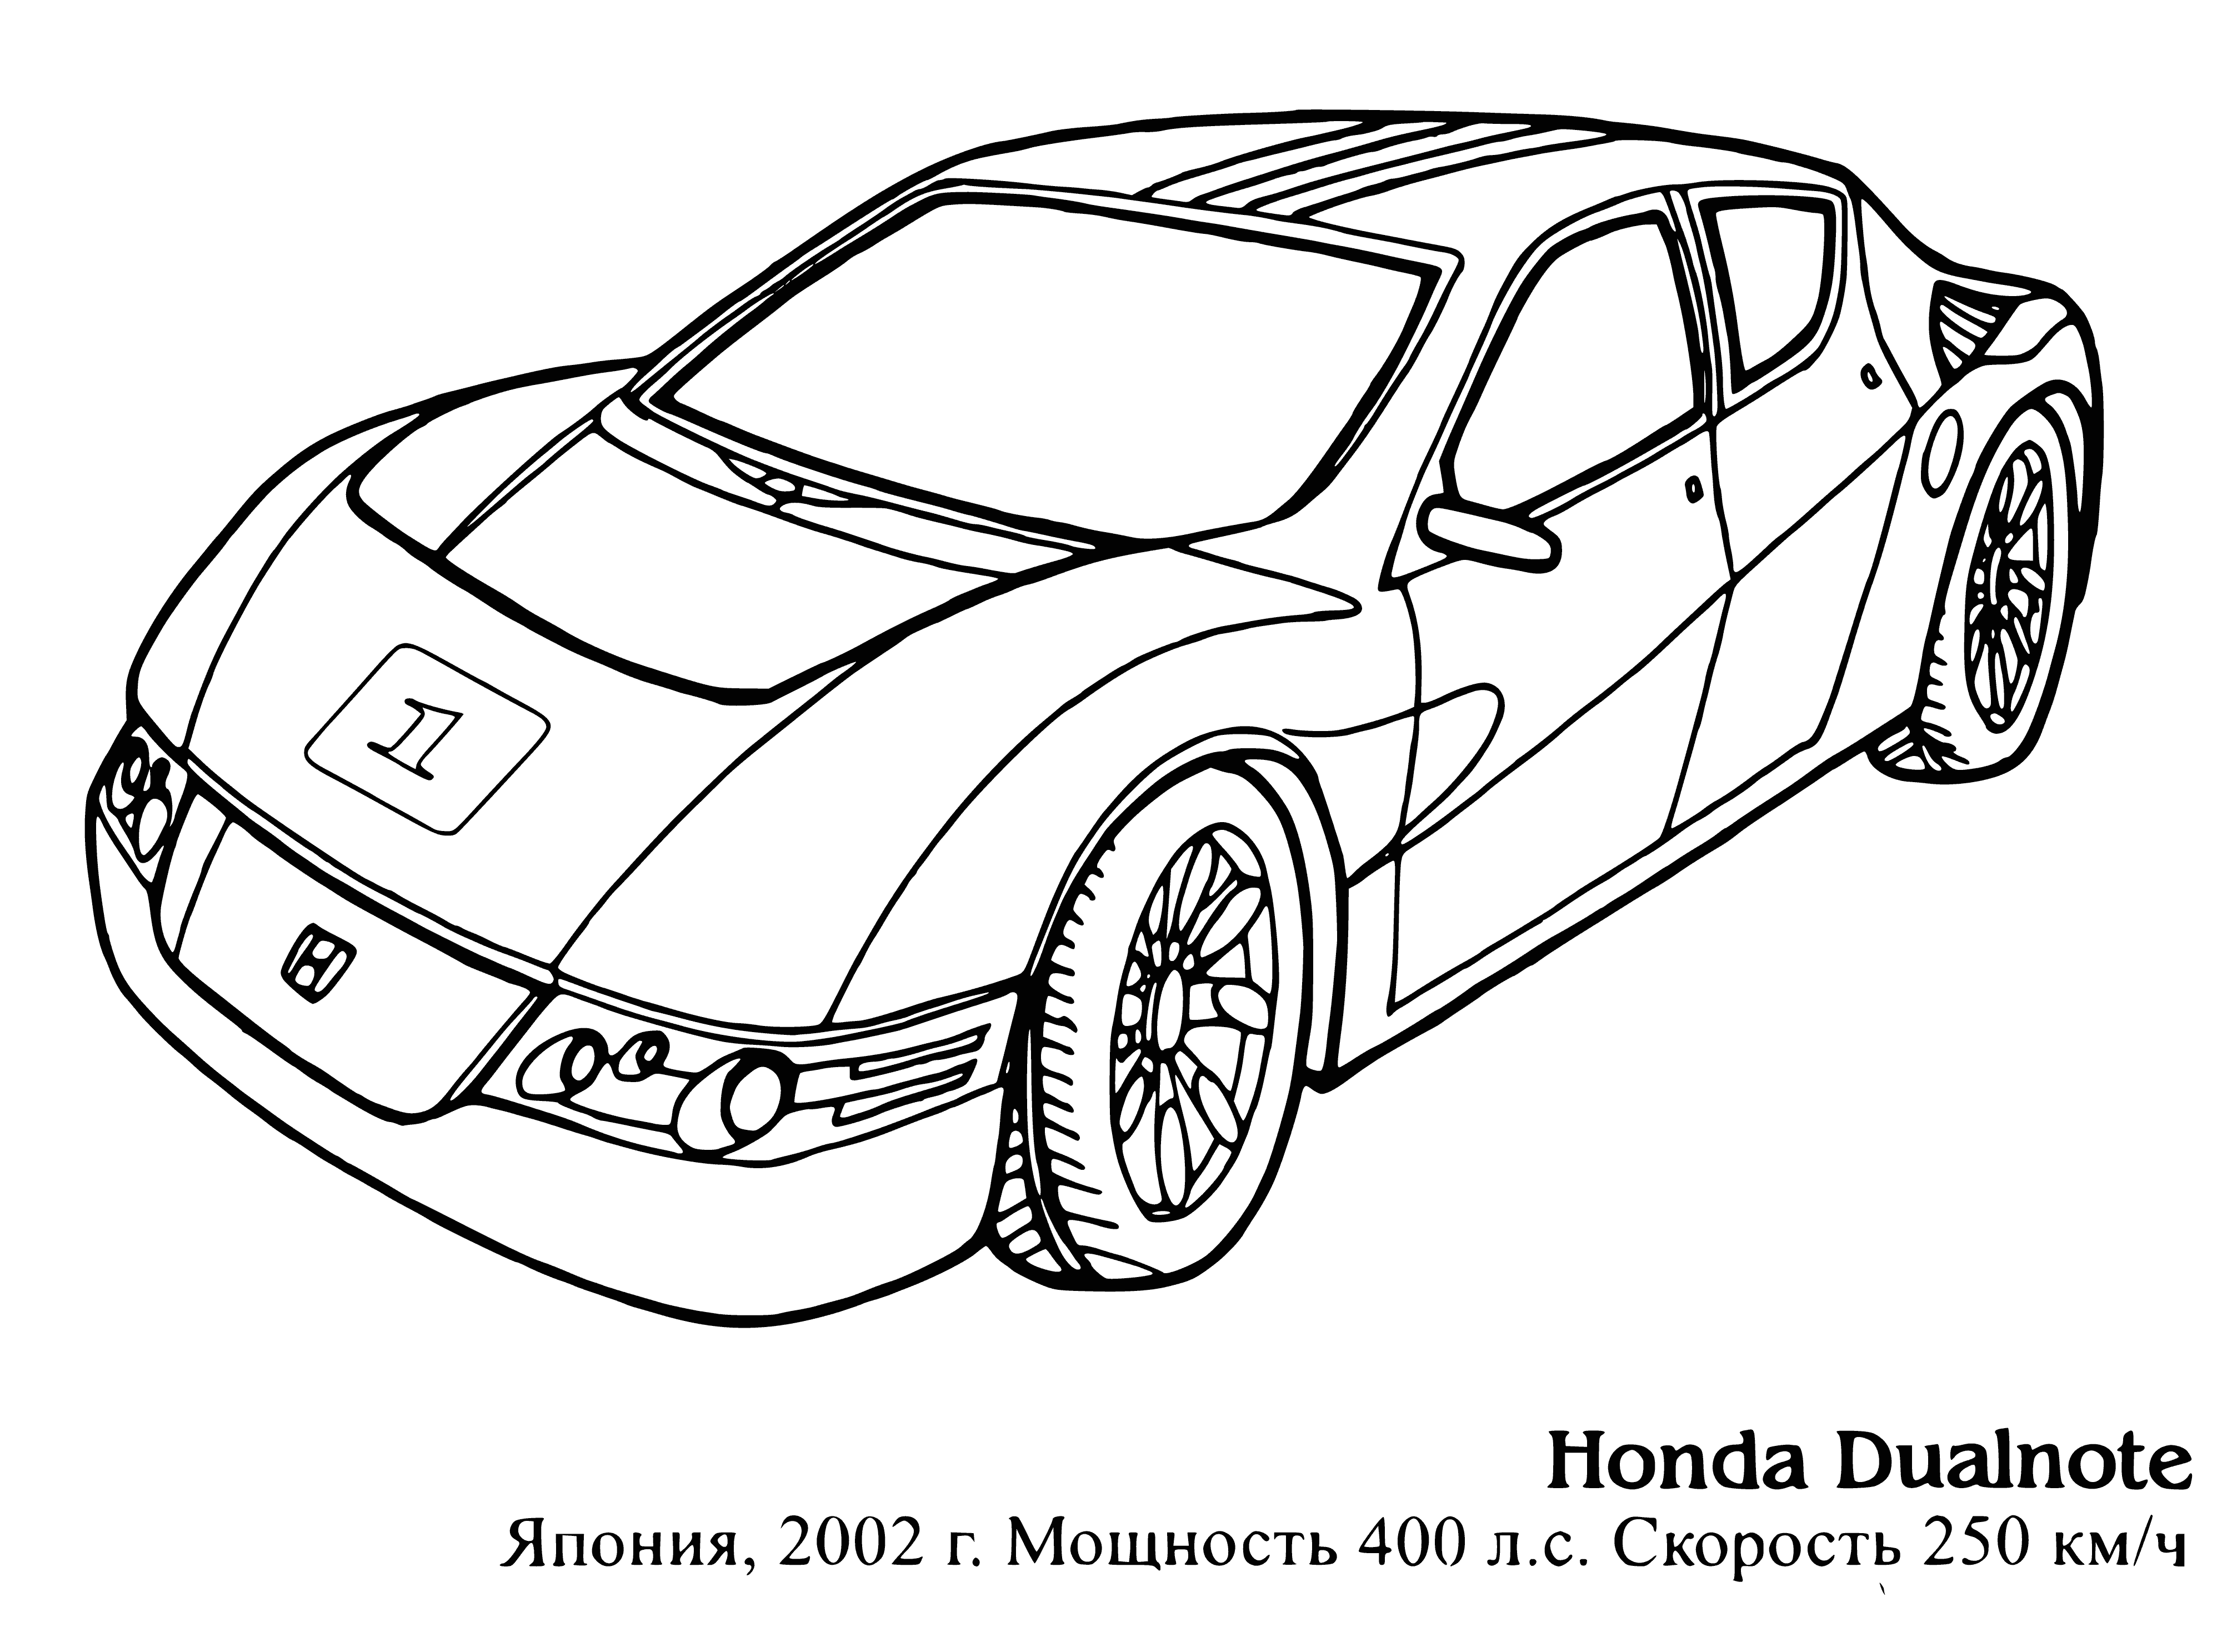 coloring page: Car is blue, white, and grey. Has 4 doors, driver inside; looks like a Honda Dualnote.